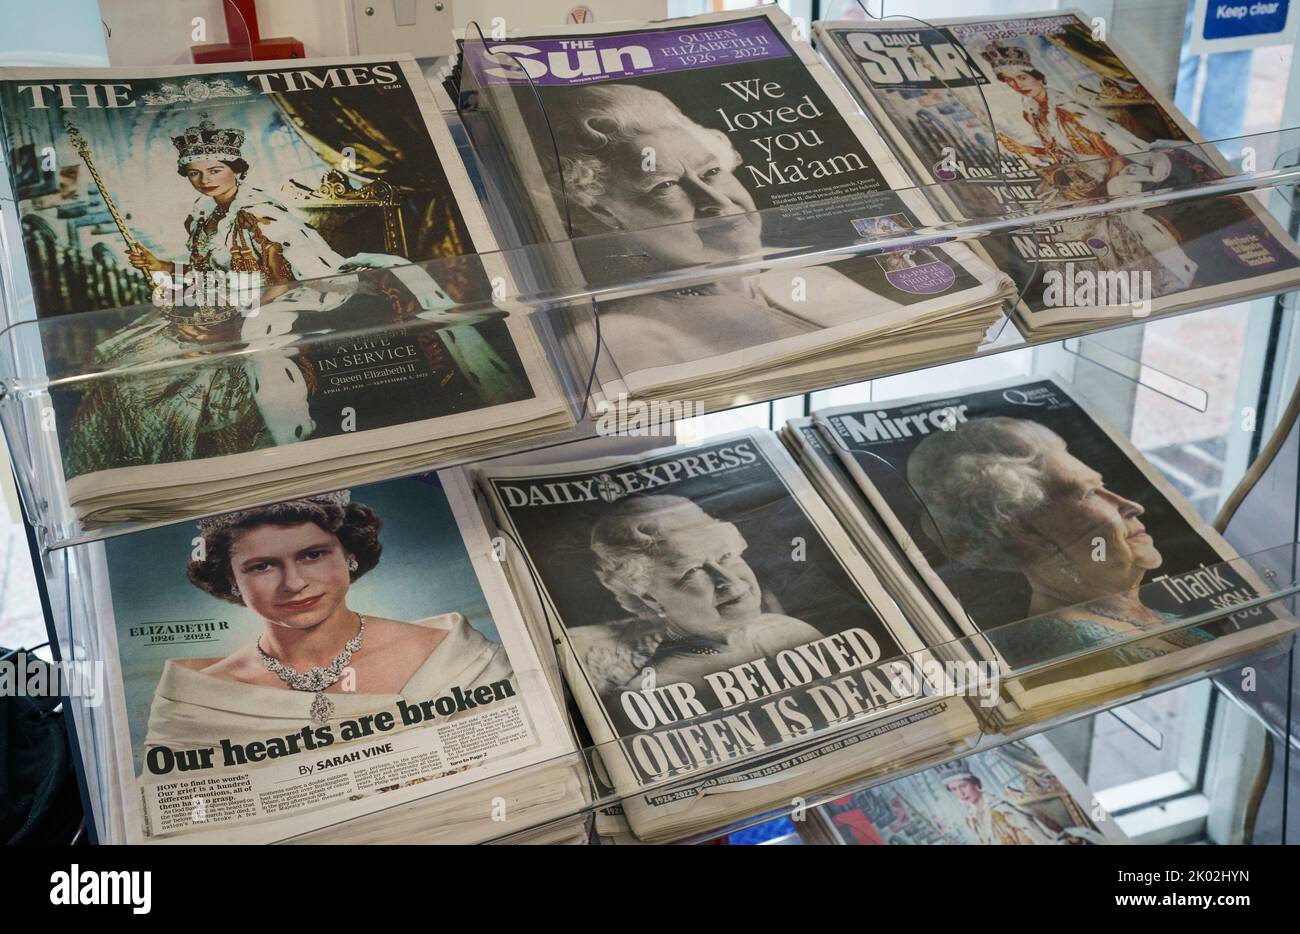 LONDON - SEPTEMBER 9: Death of Queen Elizabeth II. The British newspapers commemorating the death of Queen Elizabeth II, are published the following morning, on September 9, 2022. On a display stand in a branch of WH Smiths, the newsagent. Photo: Credit: 2022 David Levenson/Alamy Live News Stock Photo